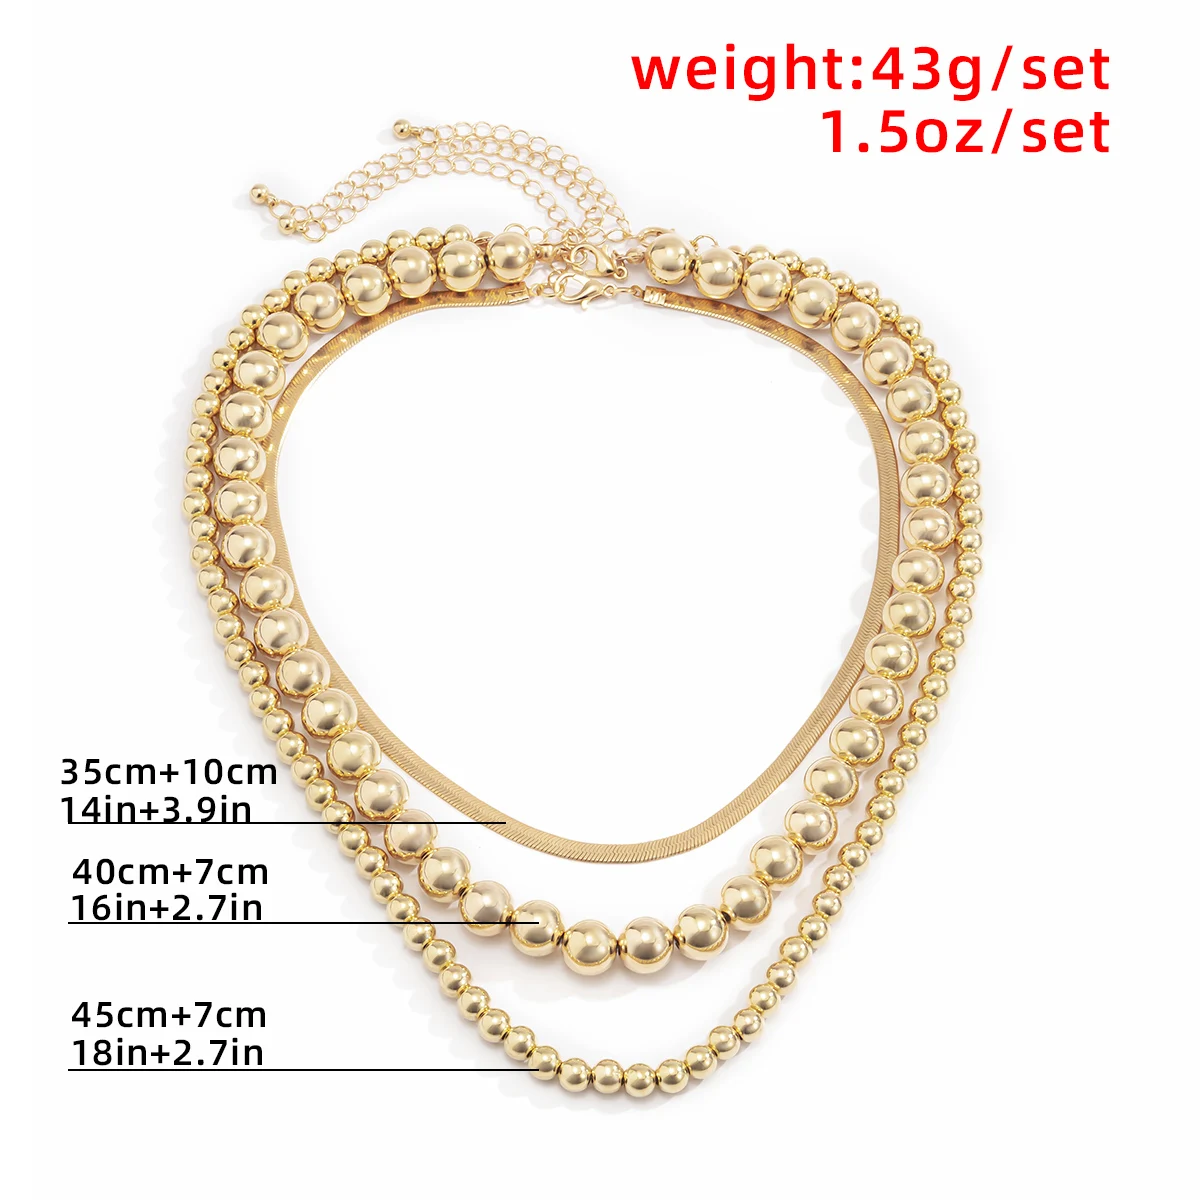 

Vintage Multi Layer Beaded Chain Necklace for Women Goth Aesthetic Snake Chain on the Neck Kpop Choker Necklace Fashion Jewelry